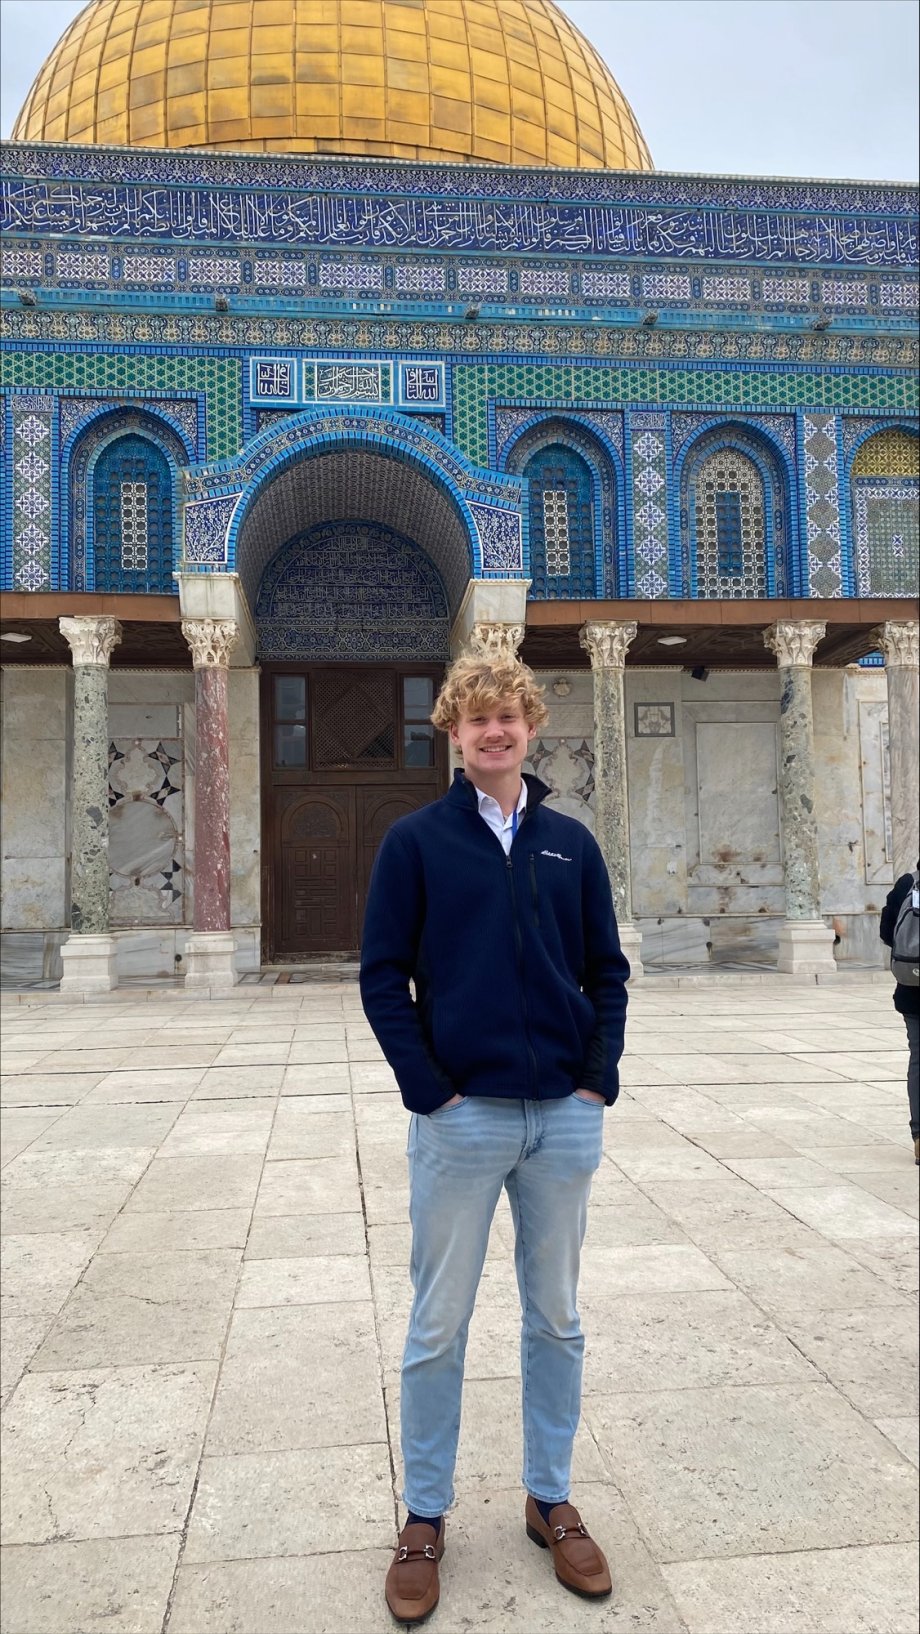 SDSU student Nick Grote poses in front of Temple Mount in Jerusalem during his Dec. 27-Jan. 7 tour of Israel with 69 other college students from throughout the United States. The trip was organized by the Jewish National Fund, which sought out students who were campus leaders.